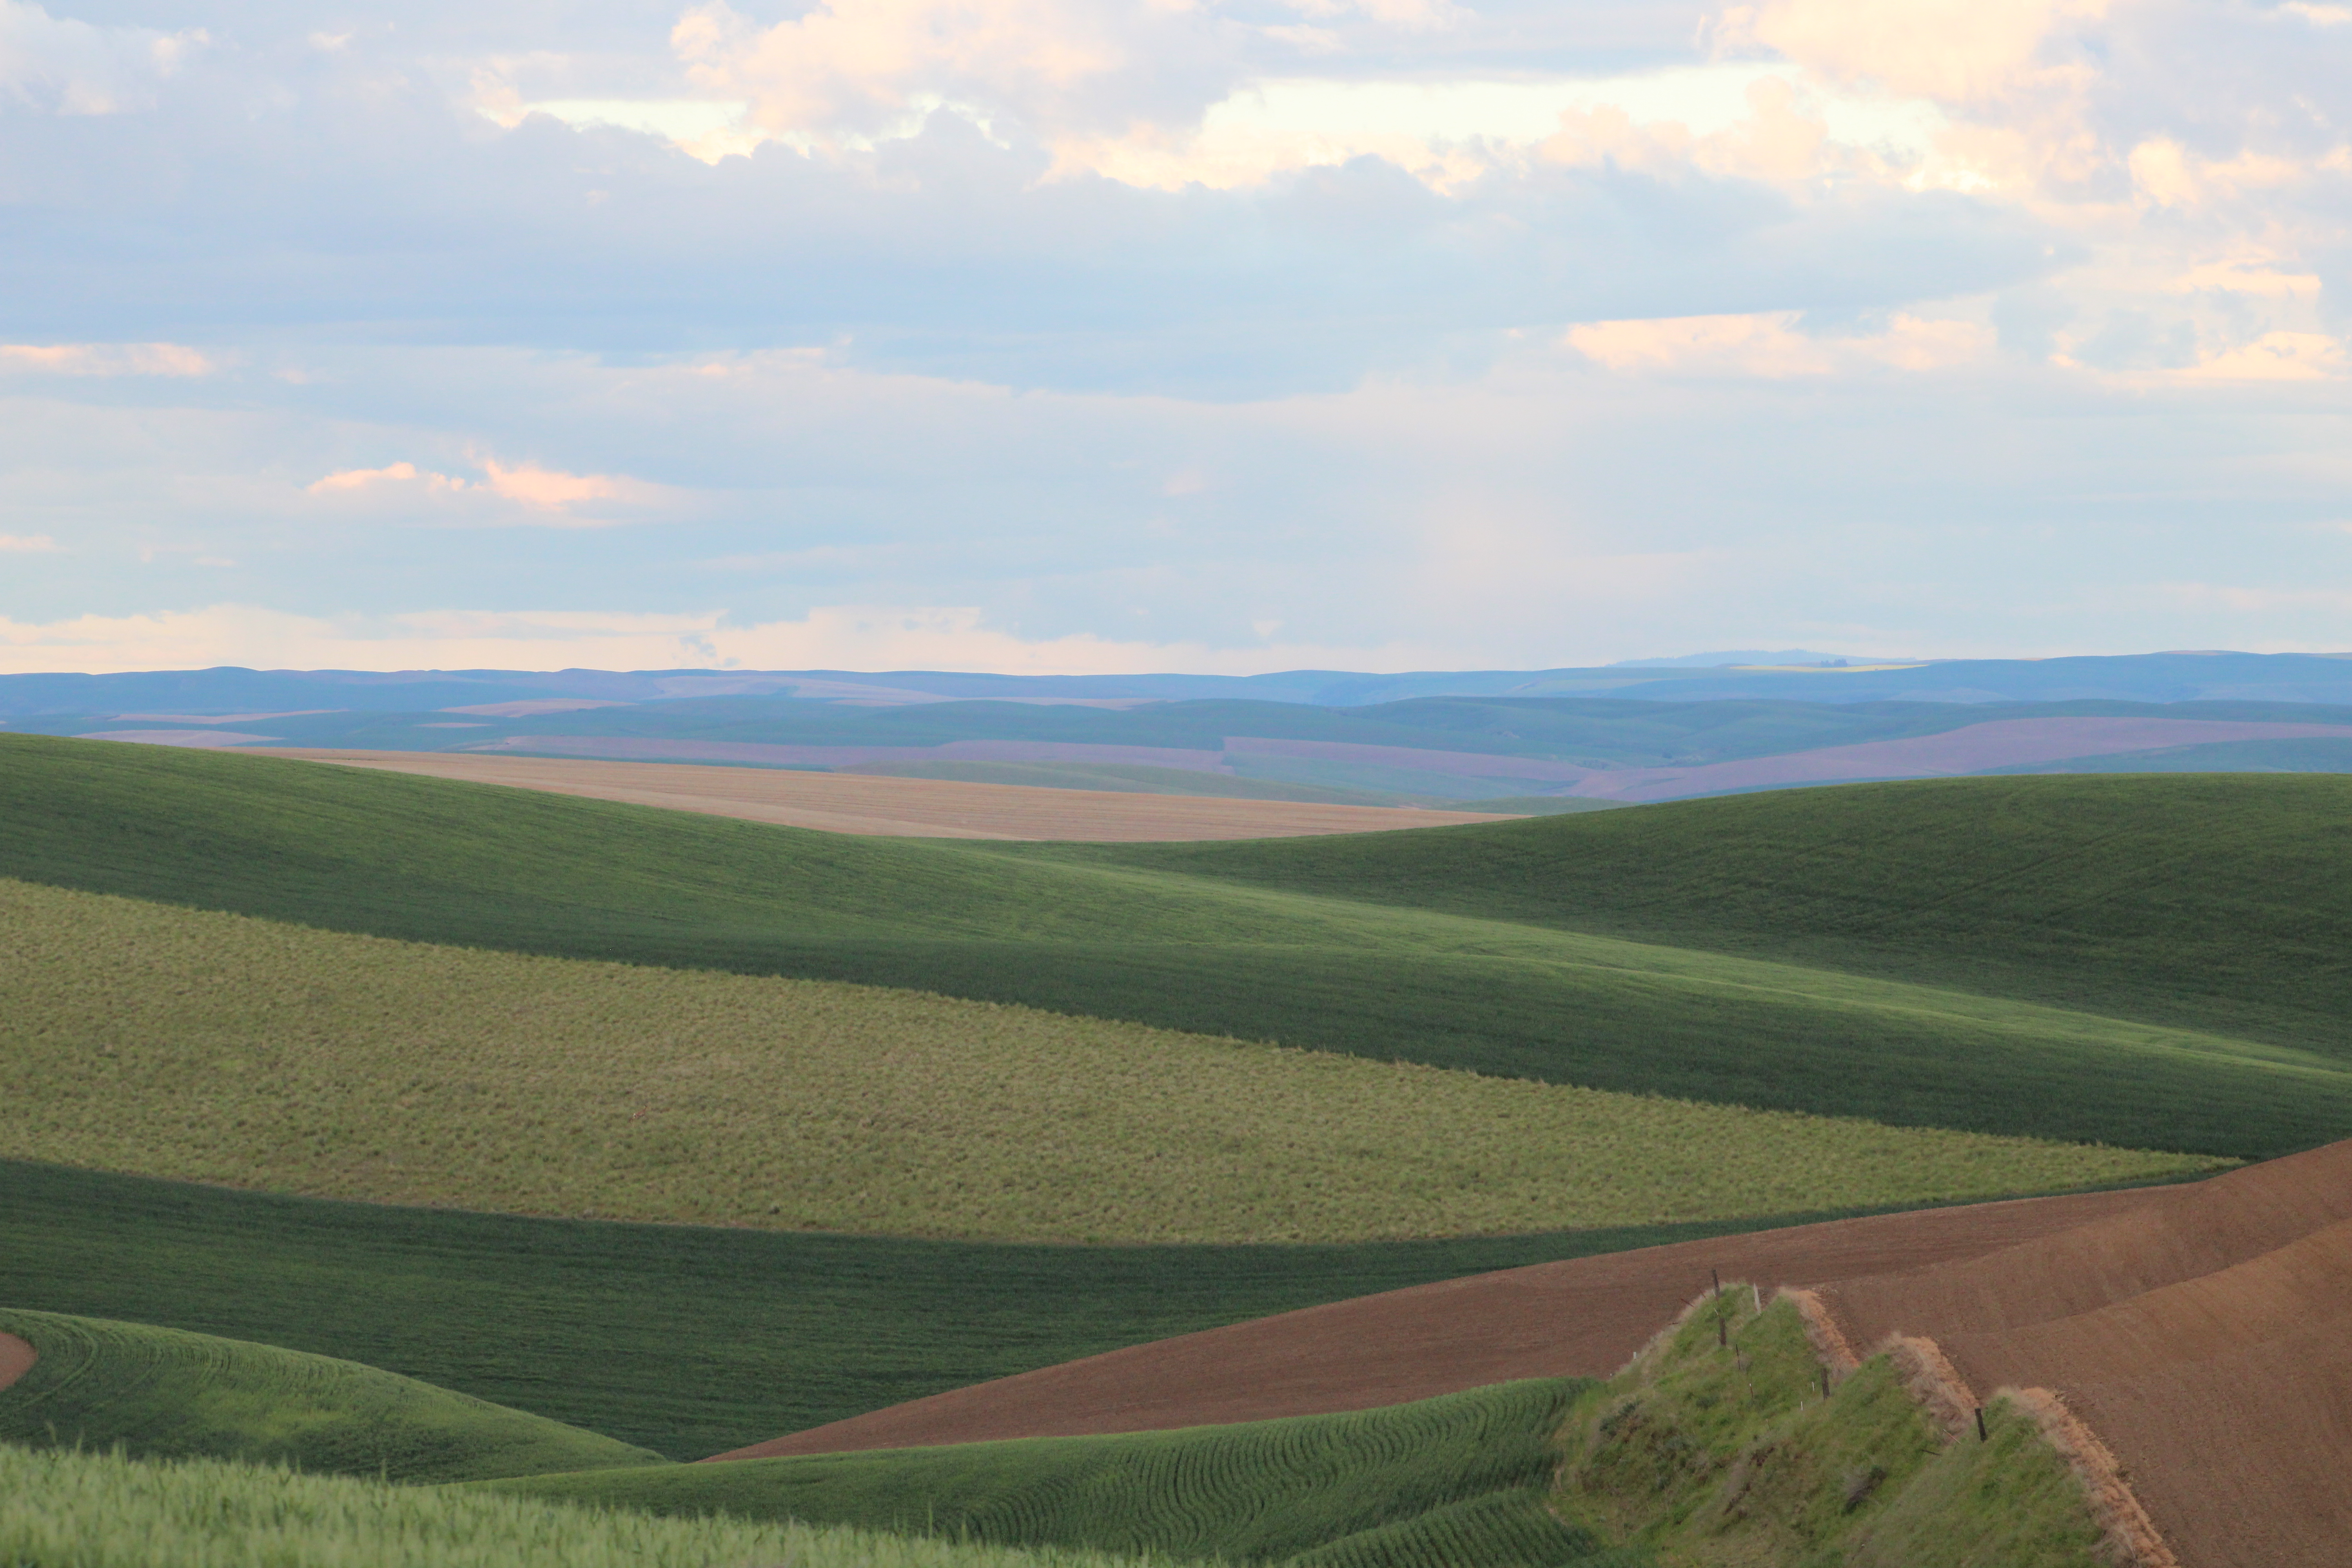 rolling hills of the Palouse with striped green and brown